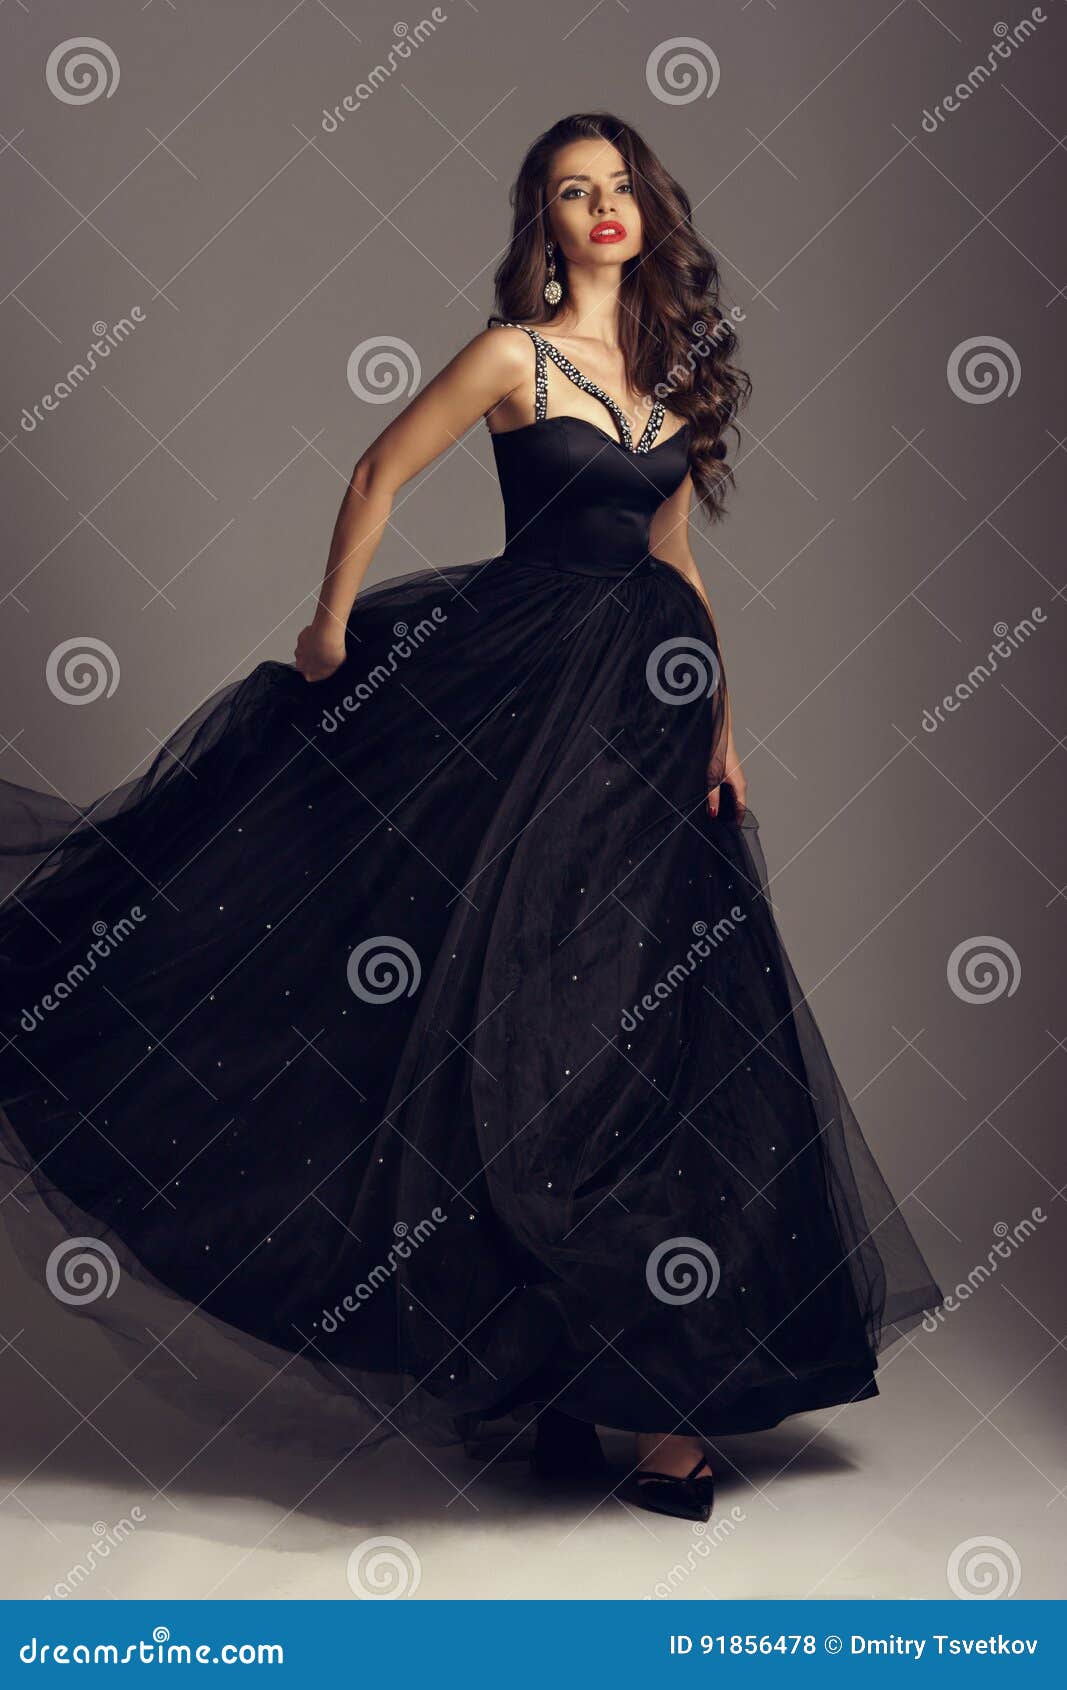 Pretty girl in ball gown stock photo. Image of dress - 91856478